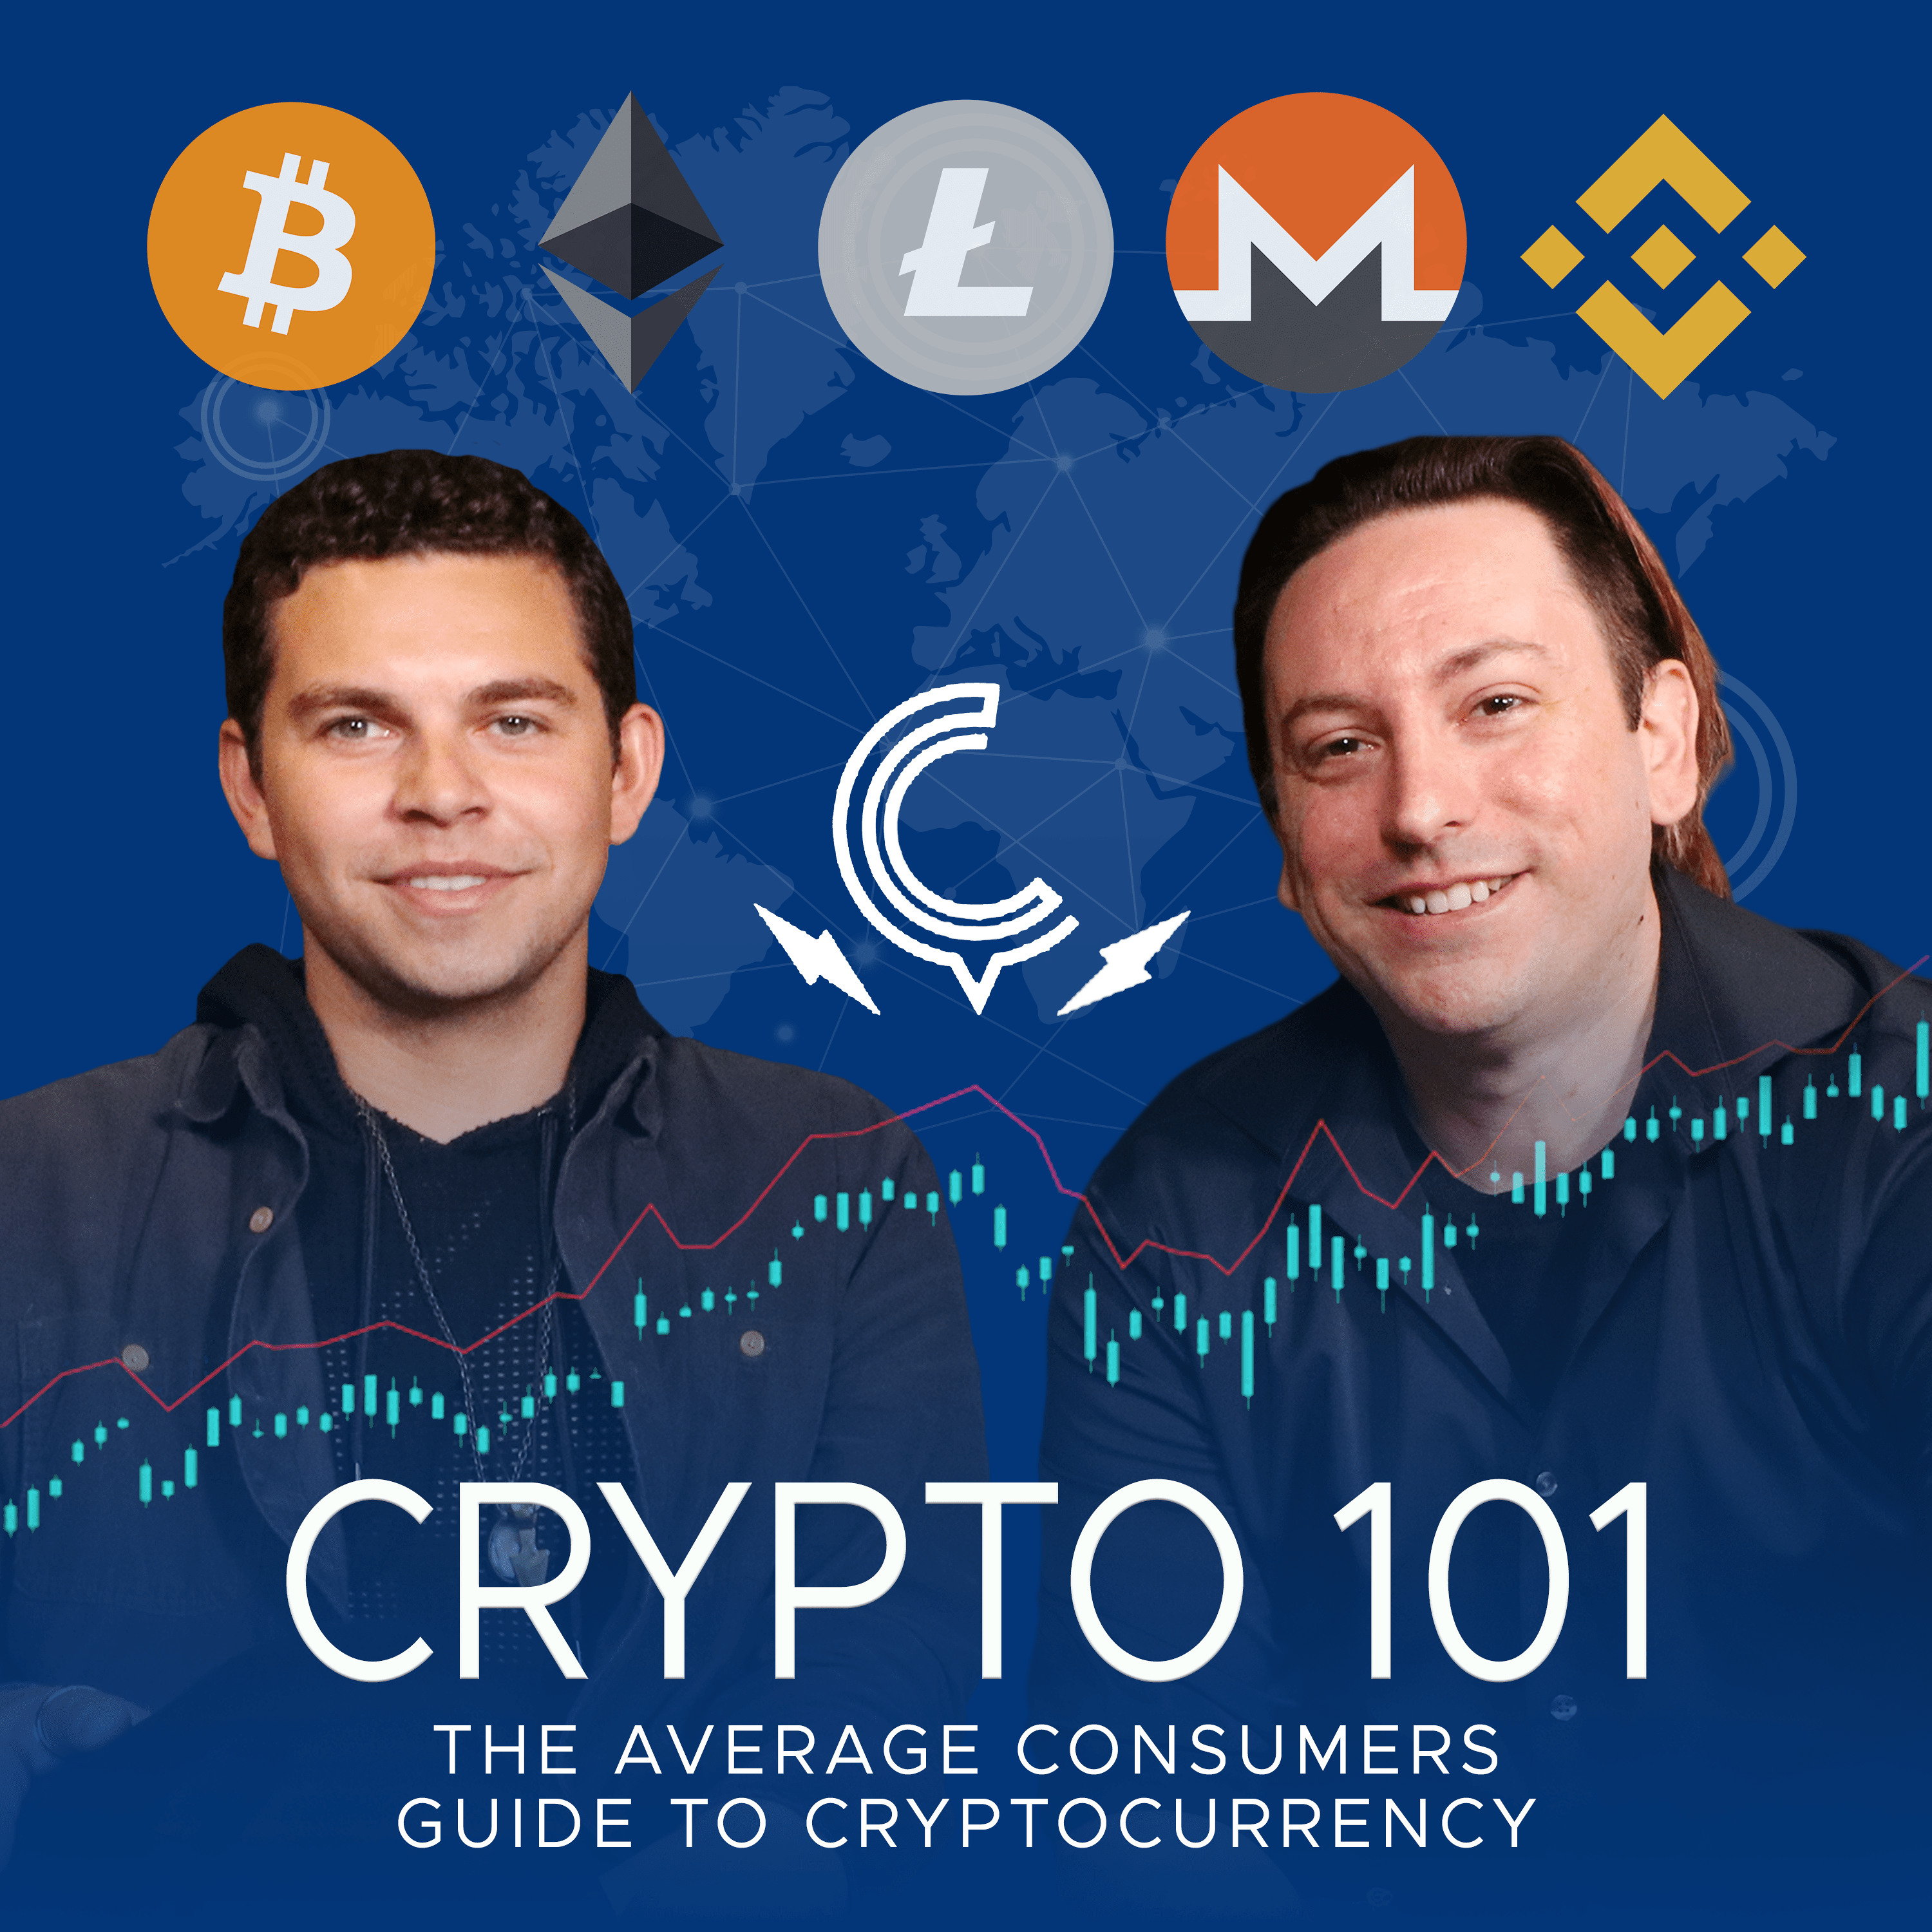 Ep. 80 - My Ether Wallet & My Crypto 101 w/ Founder Taylor Monahan ft: Dani Amsalem